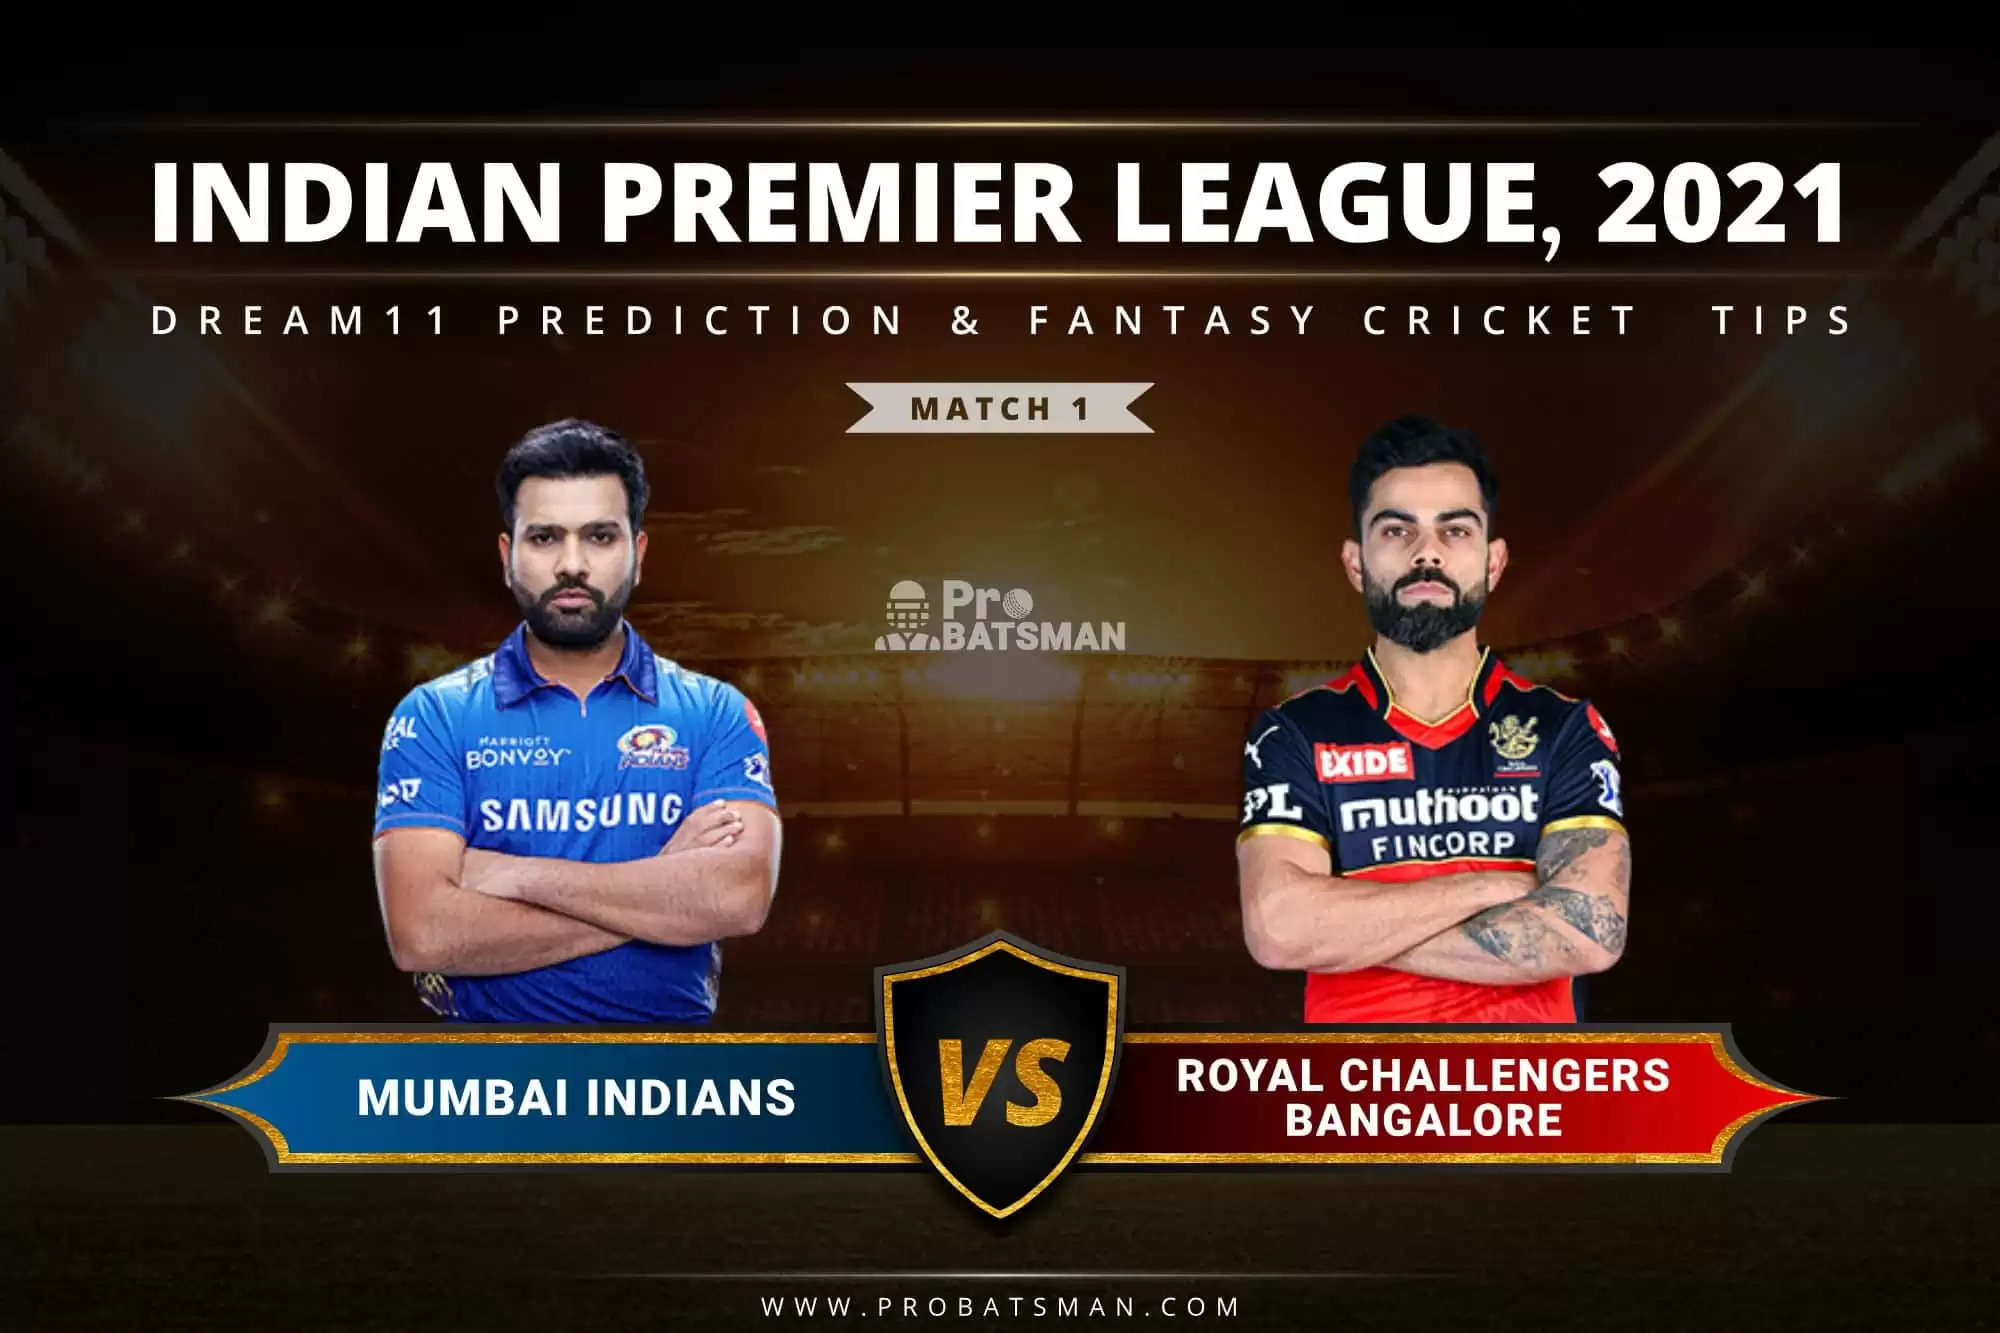 IPL 2021, MI vs RCB, Pitch Report: Mumbai Indians and RCB clash, know weather, pitch and playing XI